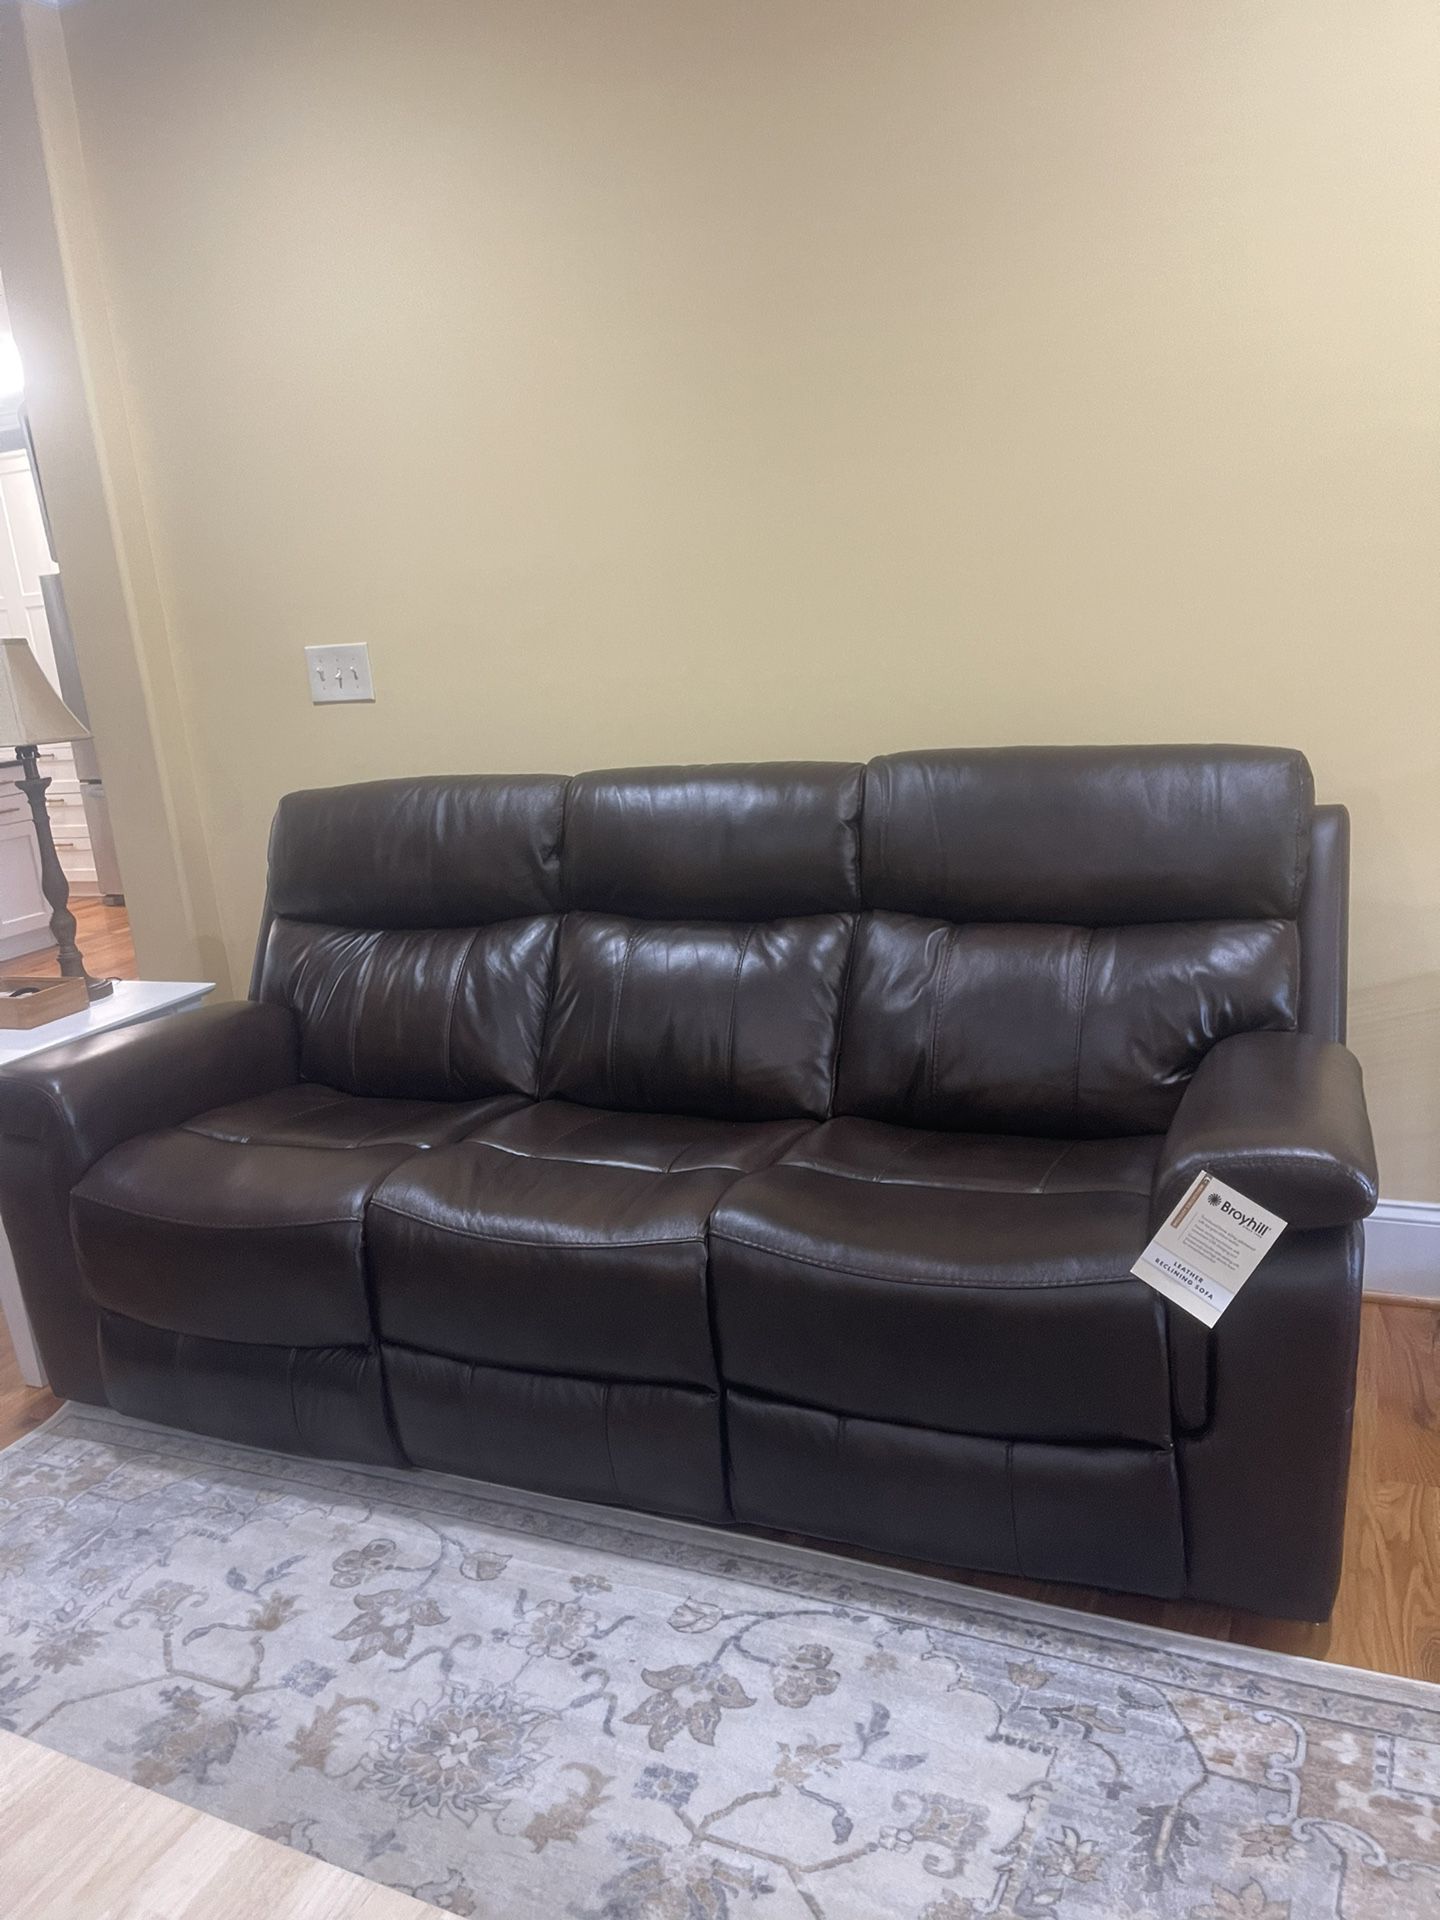 2 Leather Sofa Recliners And 1 Leather Power Recliner 